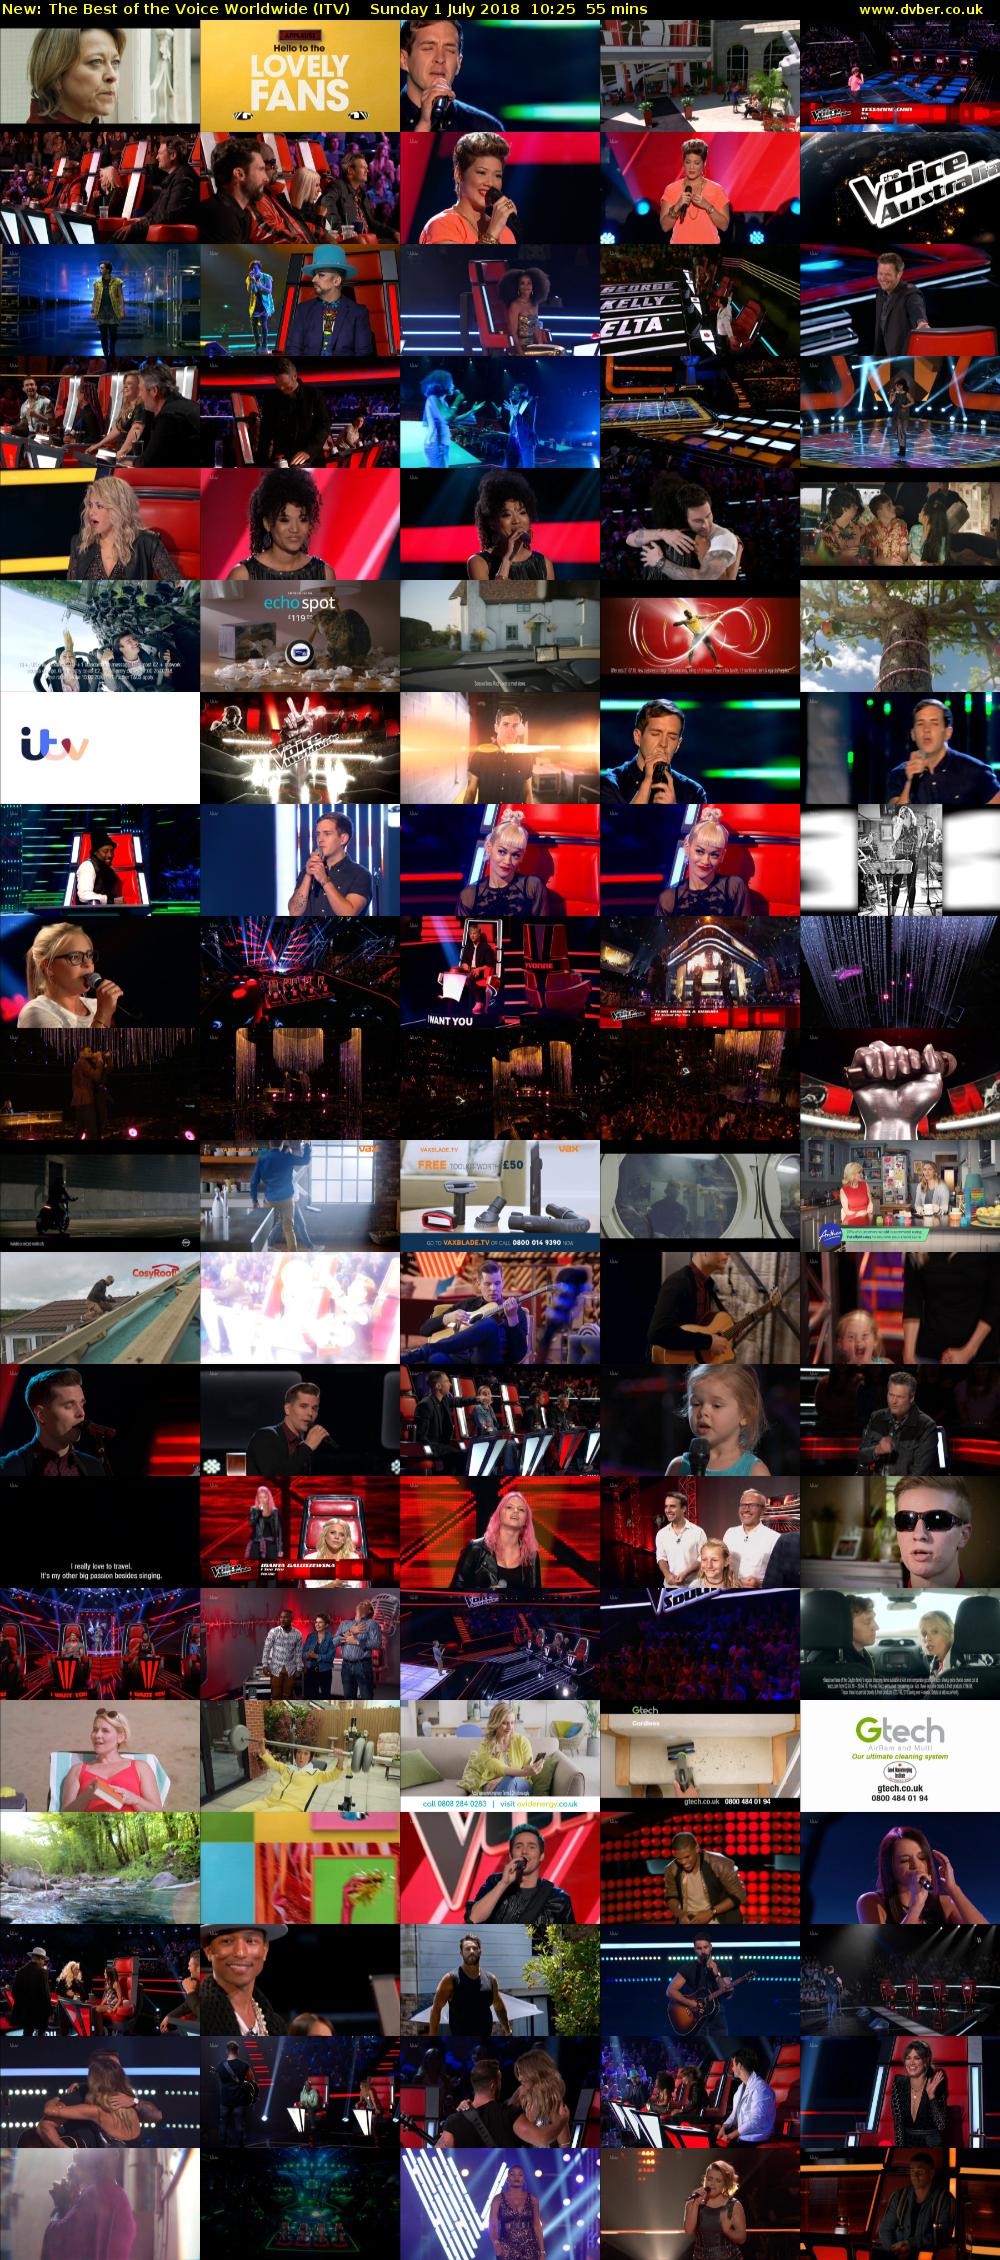 The Best of the Voice Worldwide (ITV) Sunday 1 July 2018 10:25 - 11:20